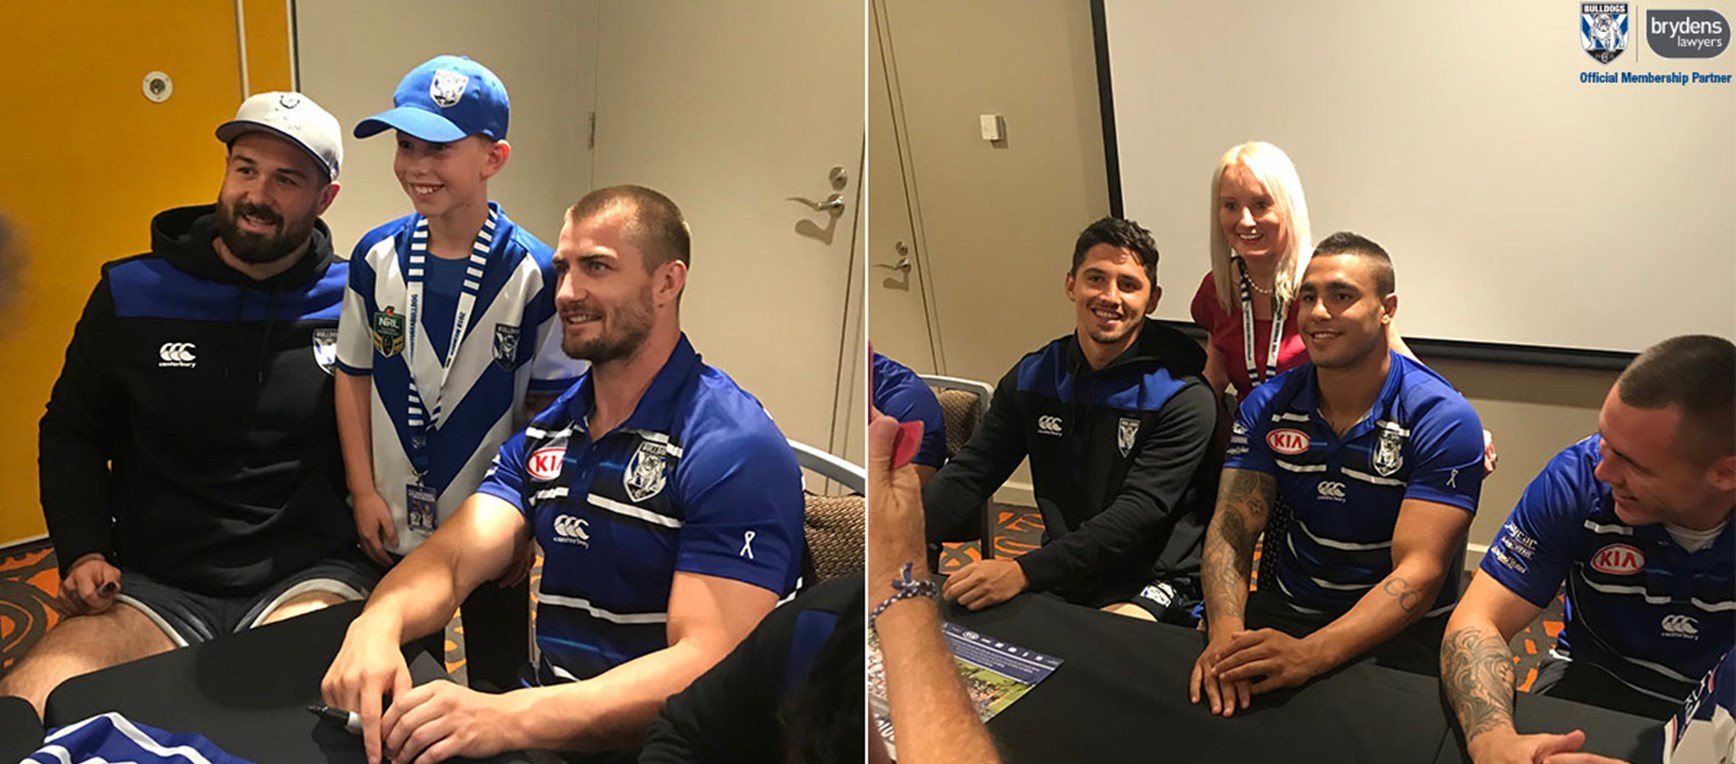 GALLERY | Members Meet and Greet in Canberra